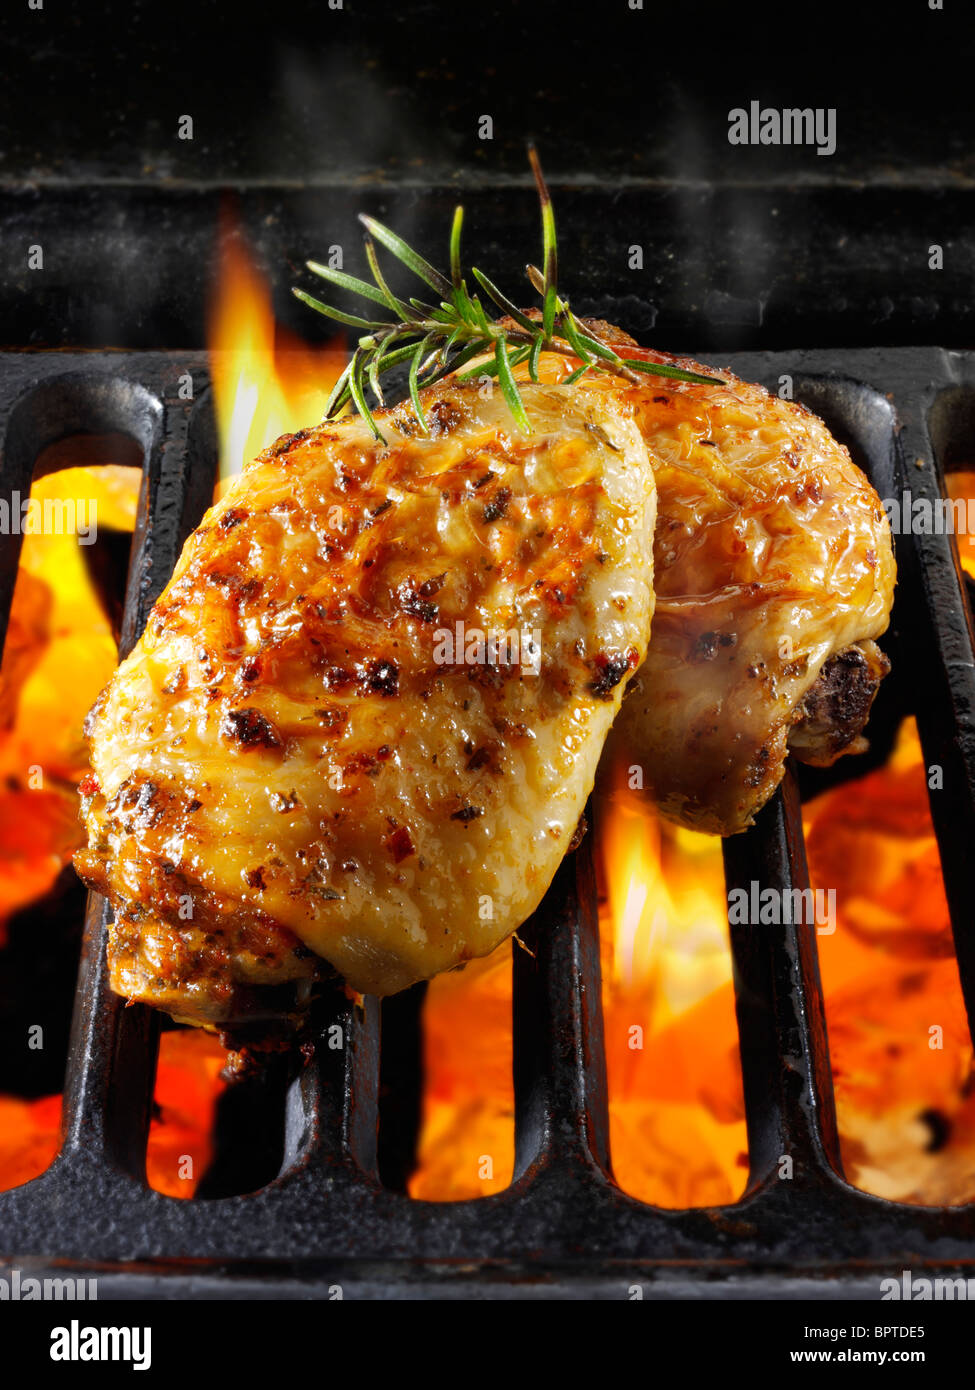 Chicken thighs cooking on a bbq. Food photos, pictures & images. Stock Photo